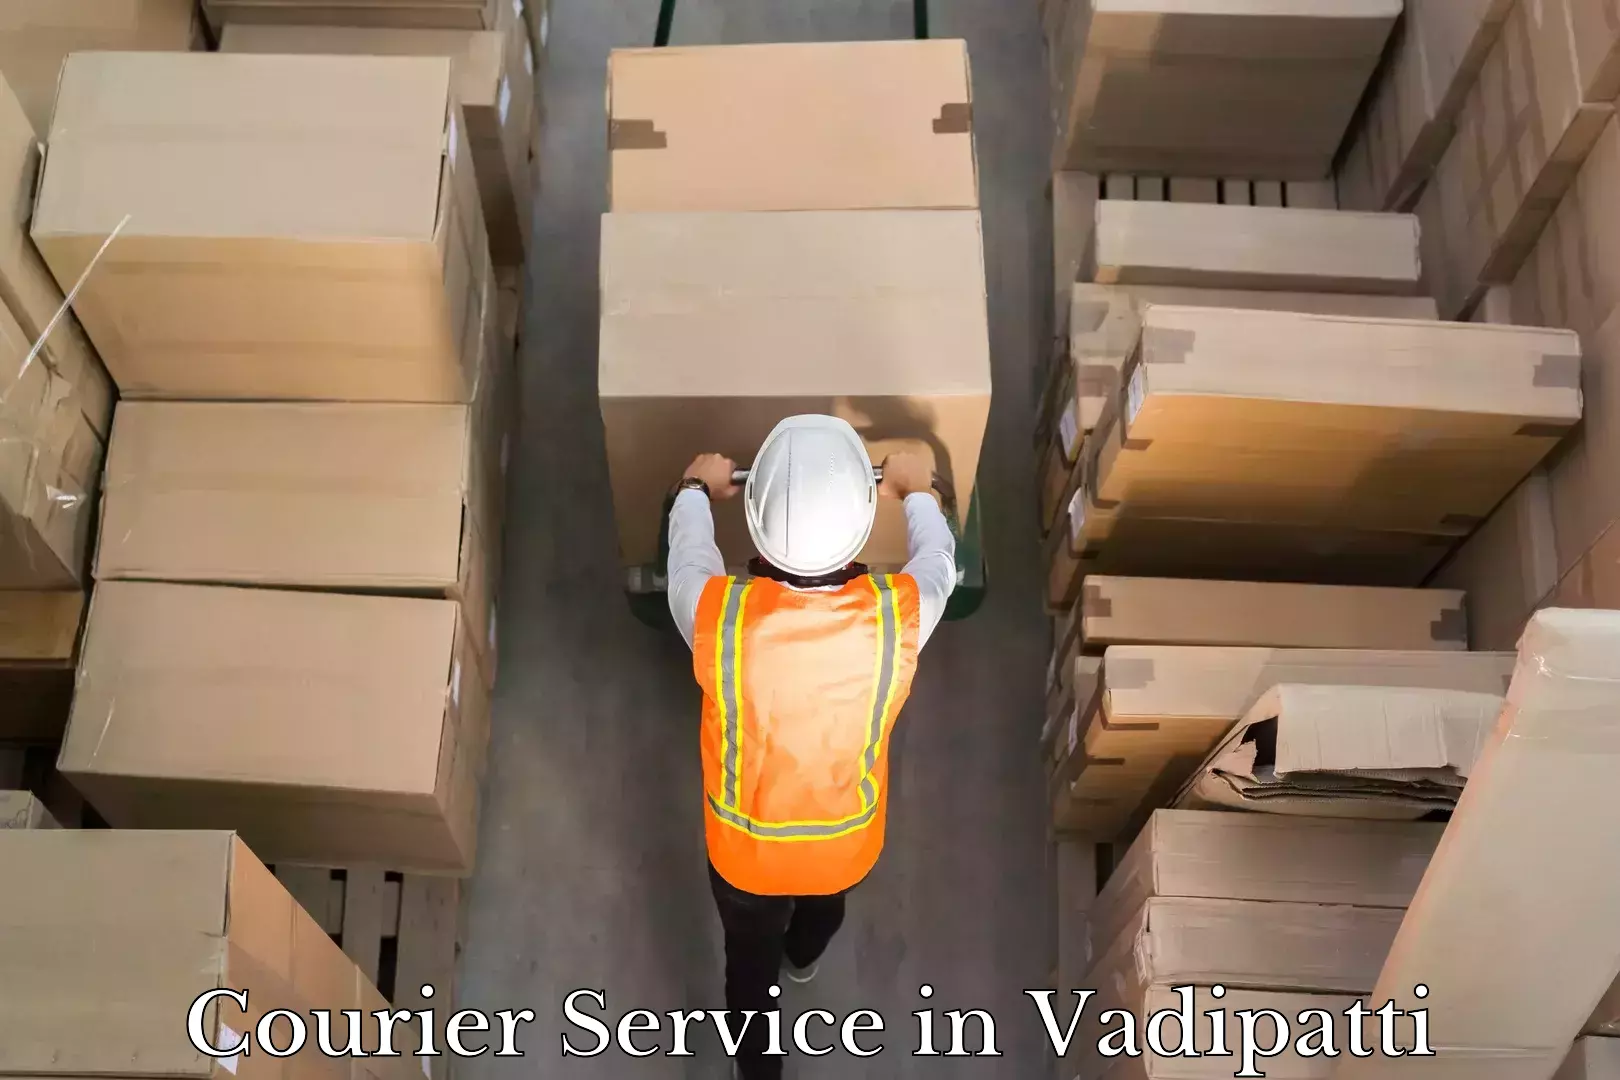 Large-scale shipping solutions in Vadipatti